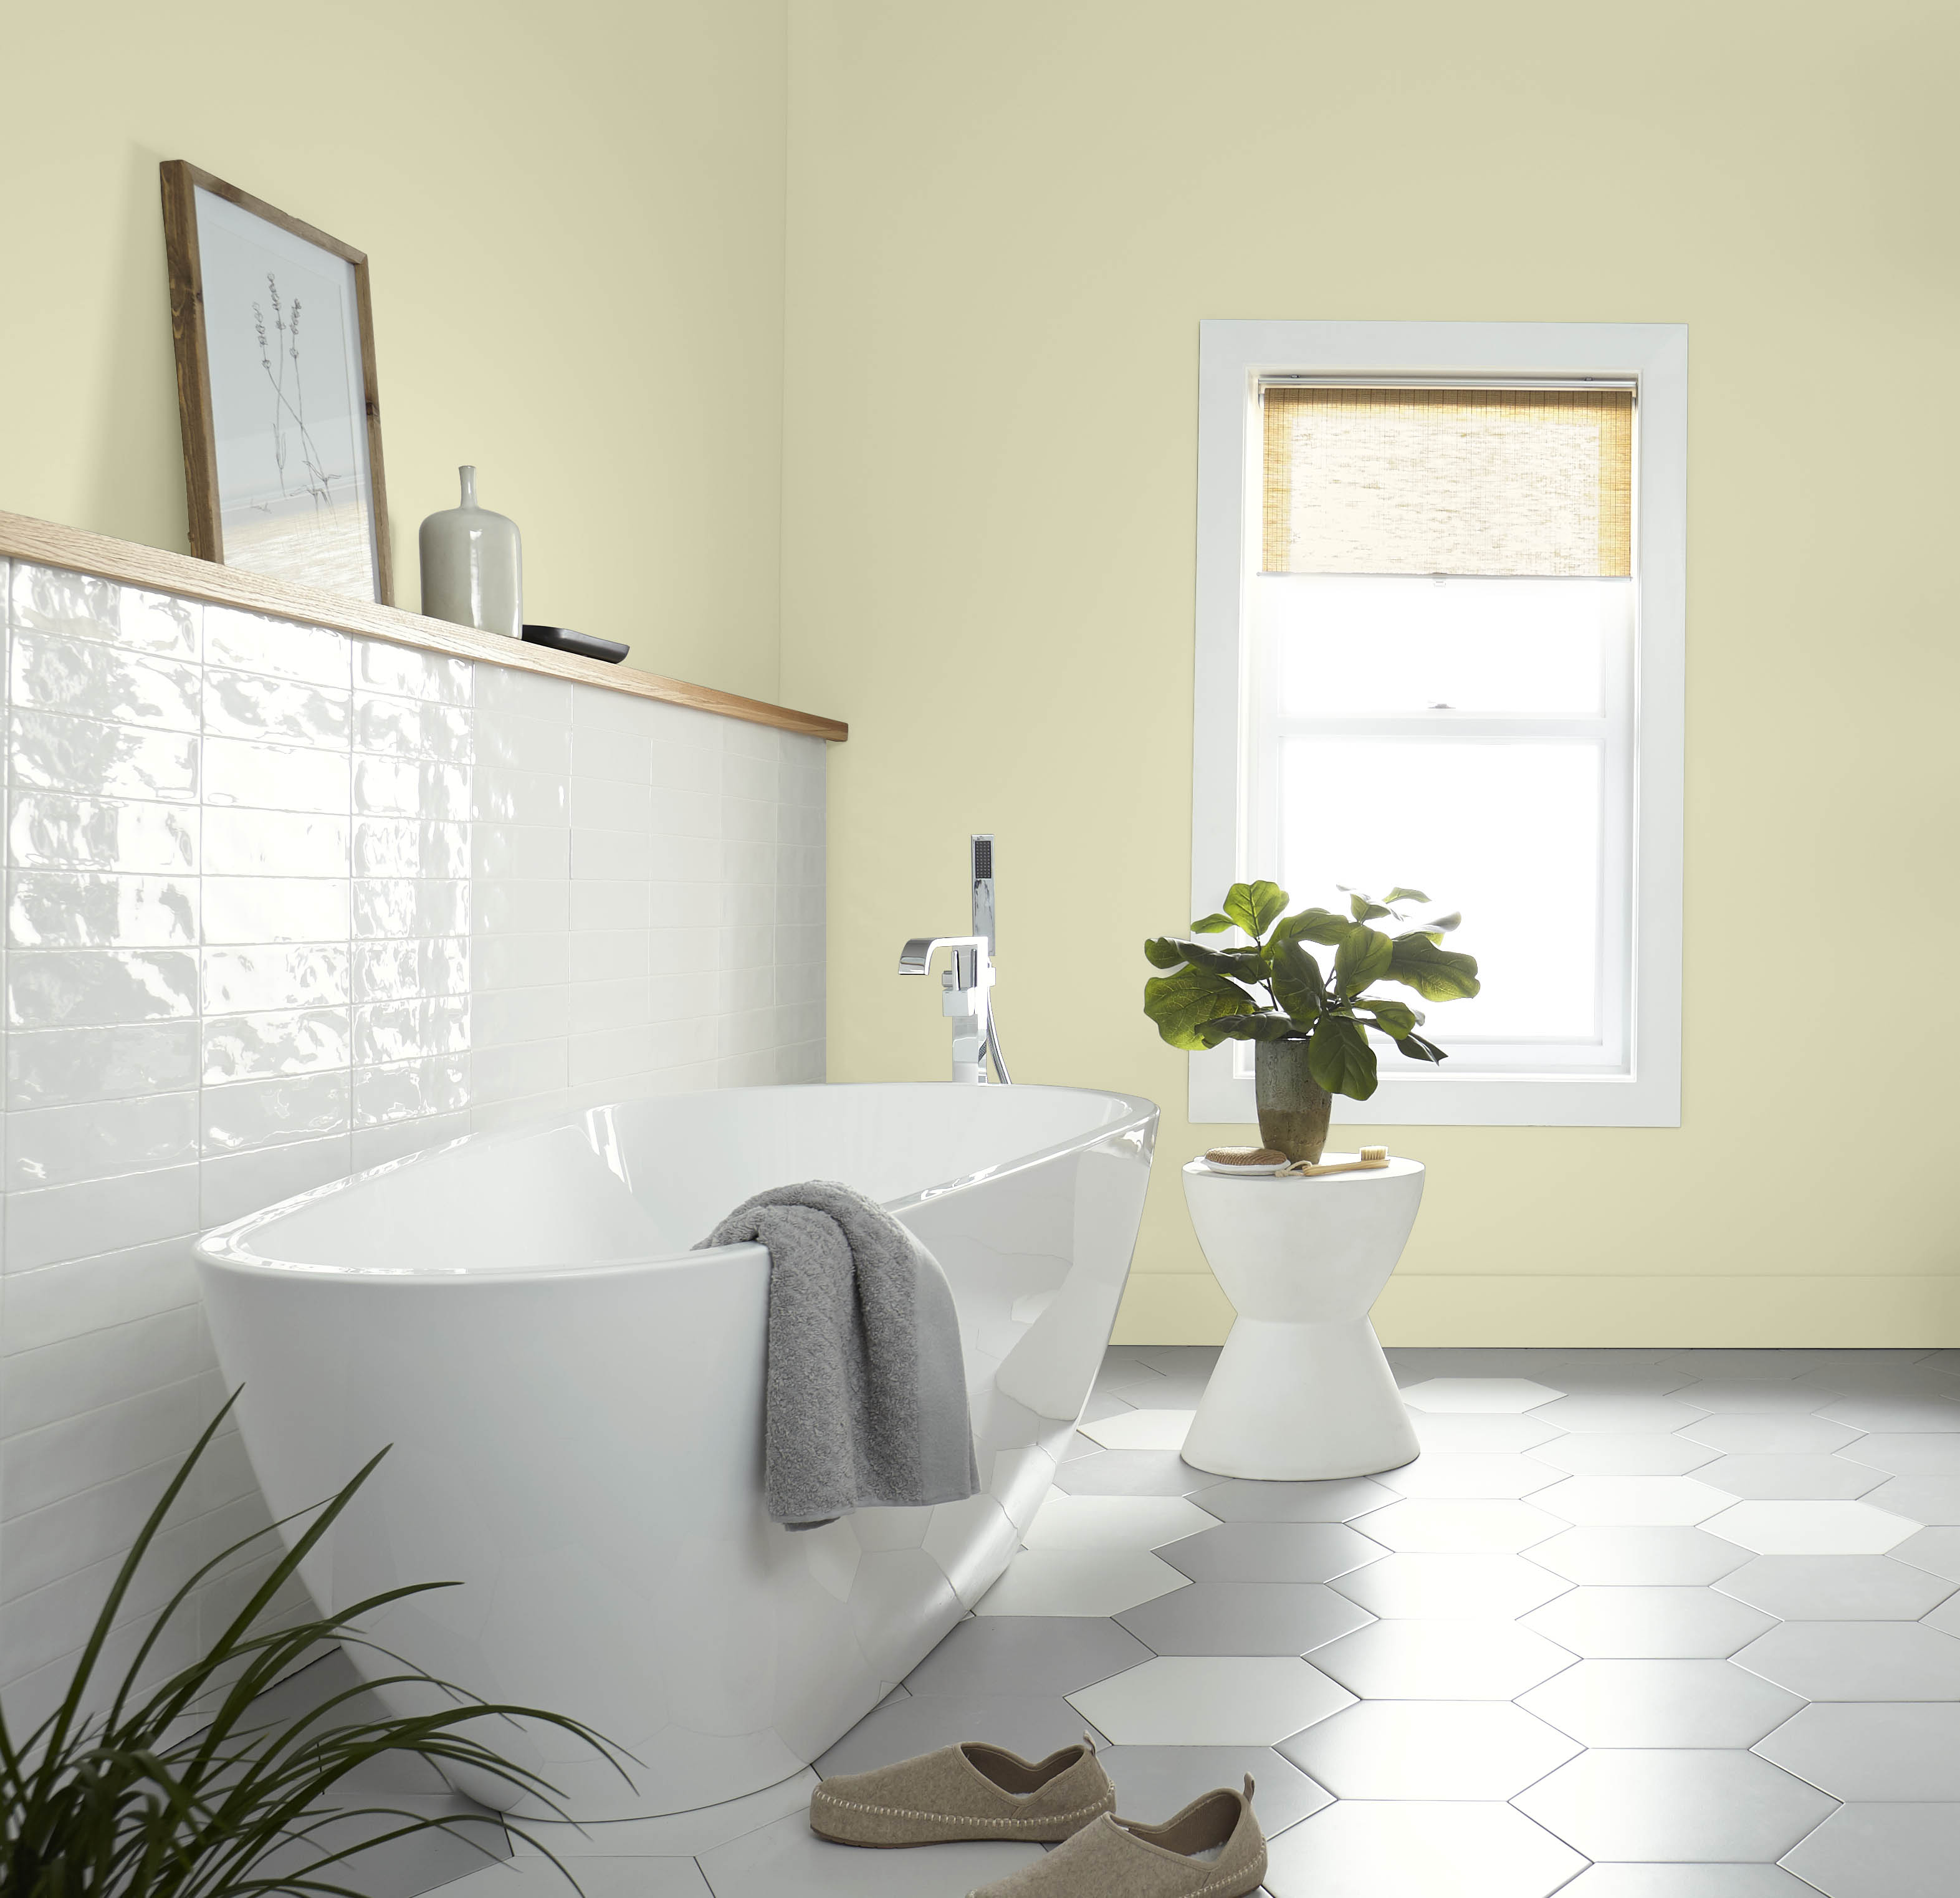 A bright bathroom with walls and baseboards in the colour Hybrid, with a bathtub and side table